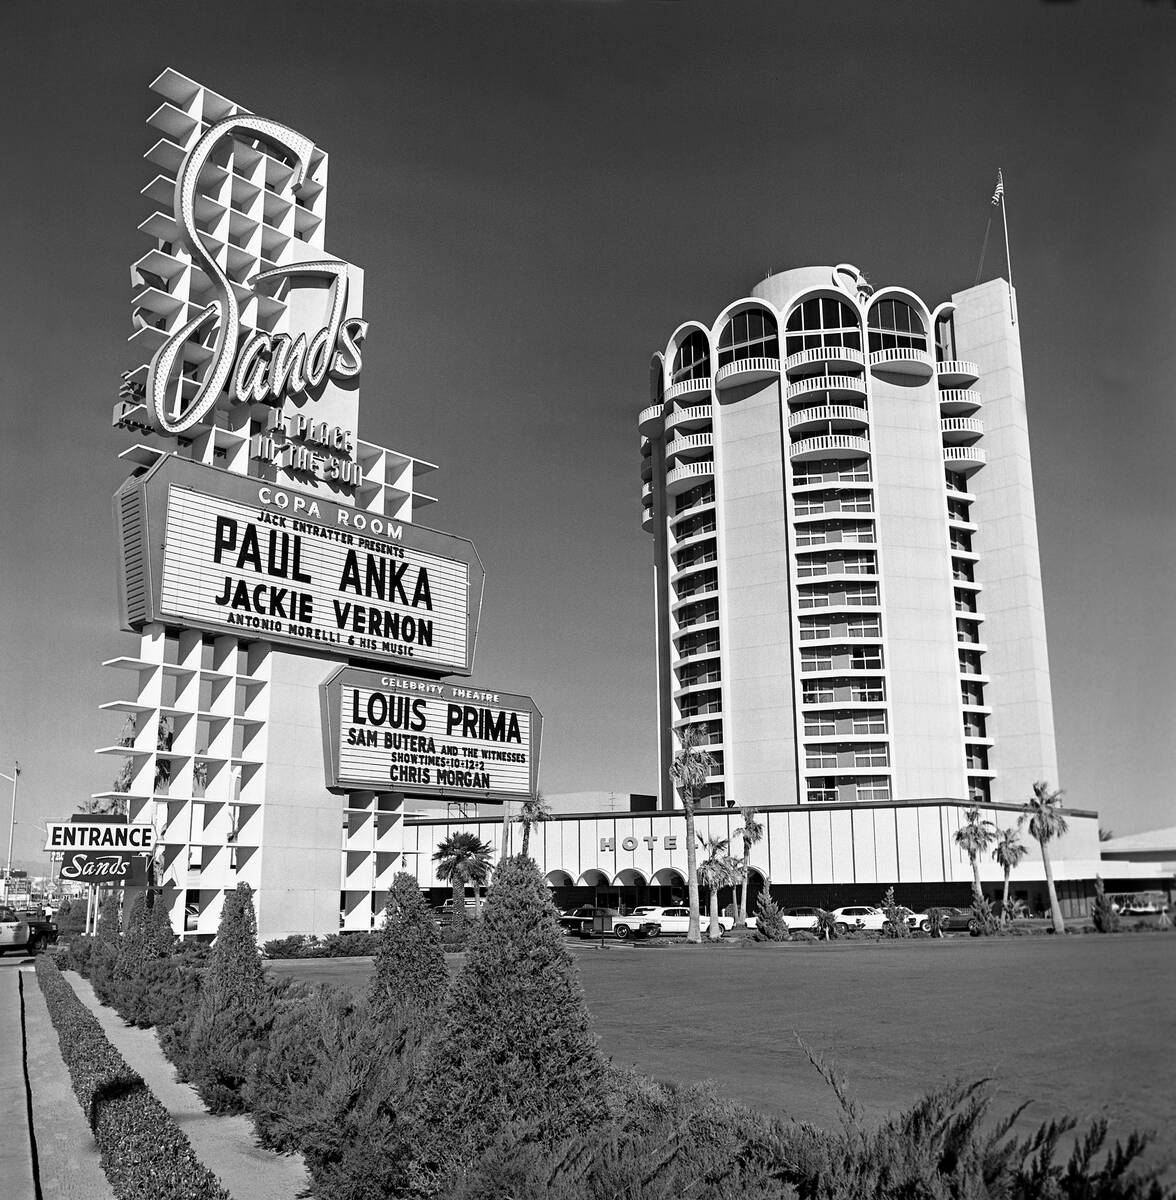 The Sands' marquee touts Paul Anka, Louis Prima, Jackie Vernon and Sam Butera on Feb. 5, 1970. ...